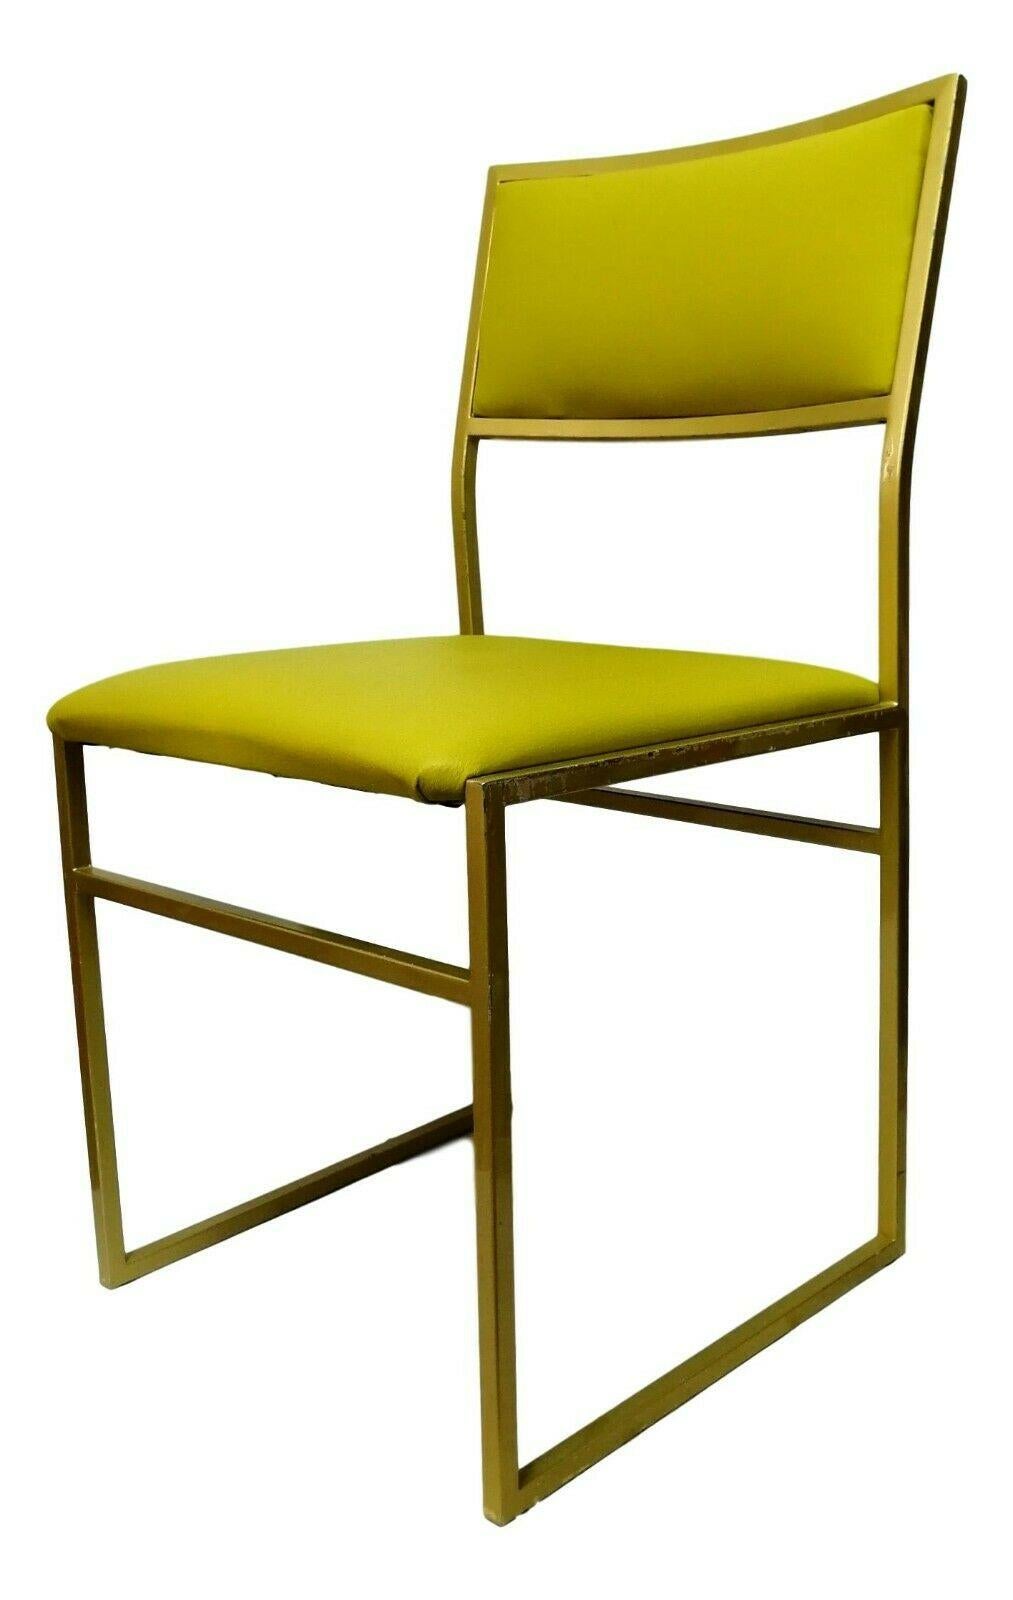 Collectible Chair in Gold Metal and Acid Green Upholstery, 1970s For Sale 2